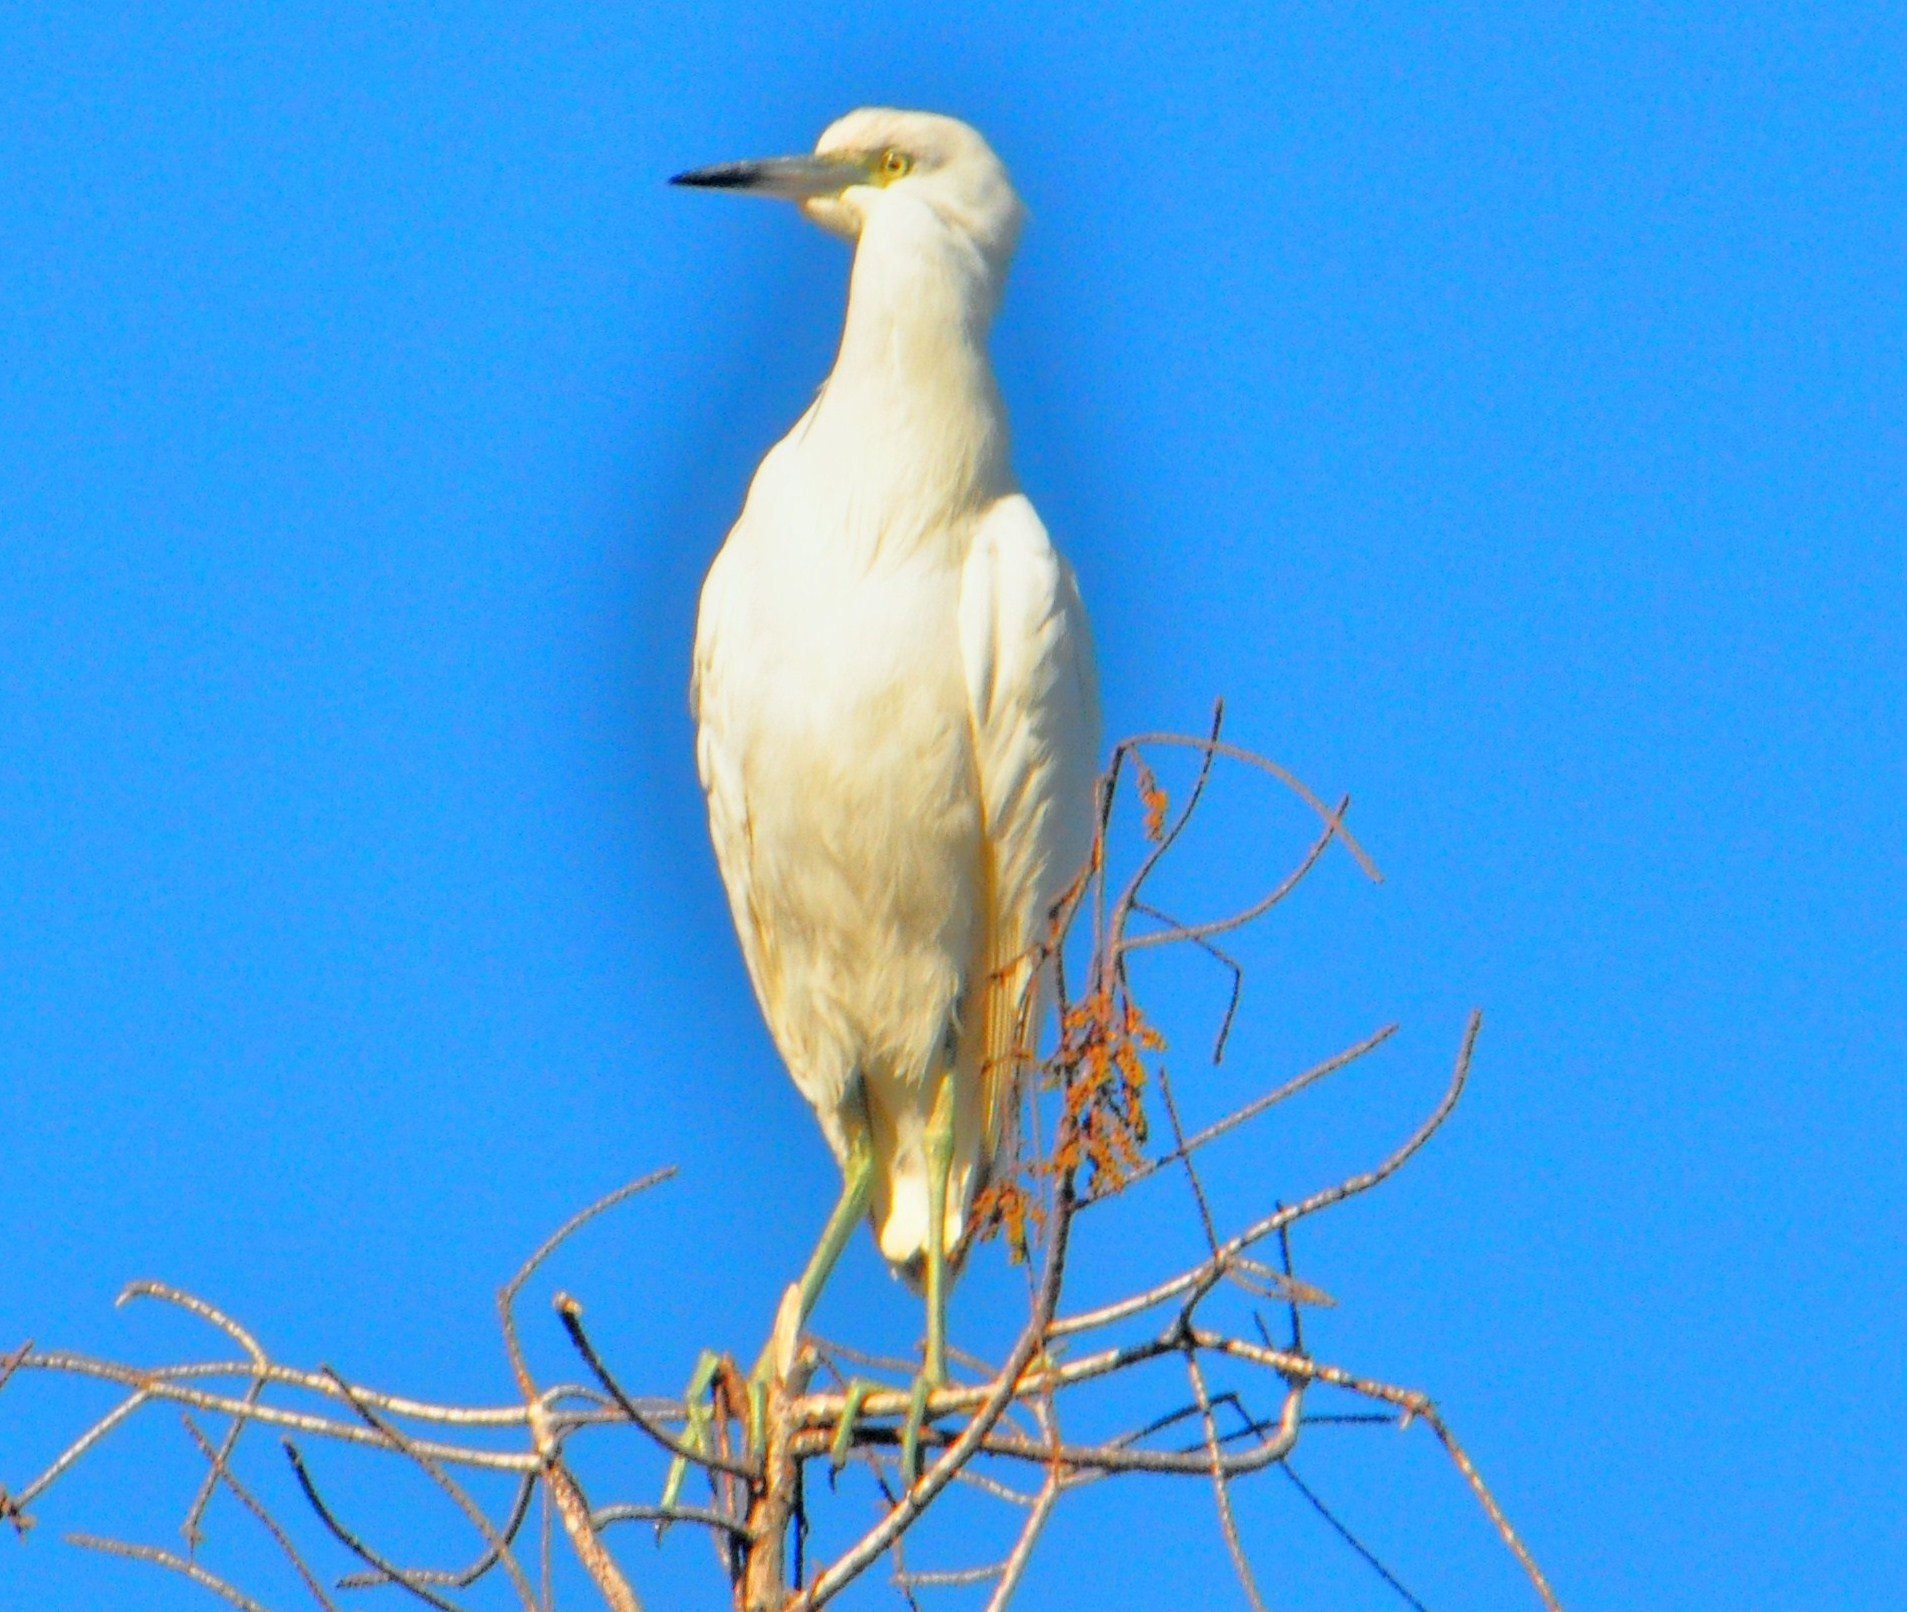 "Egret atop a Tree in the Florida Everglades"